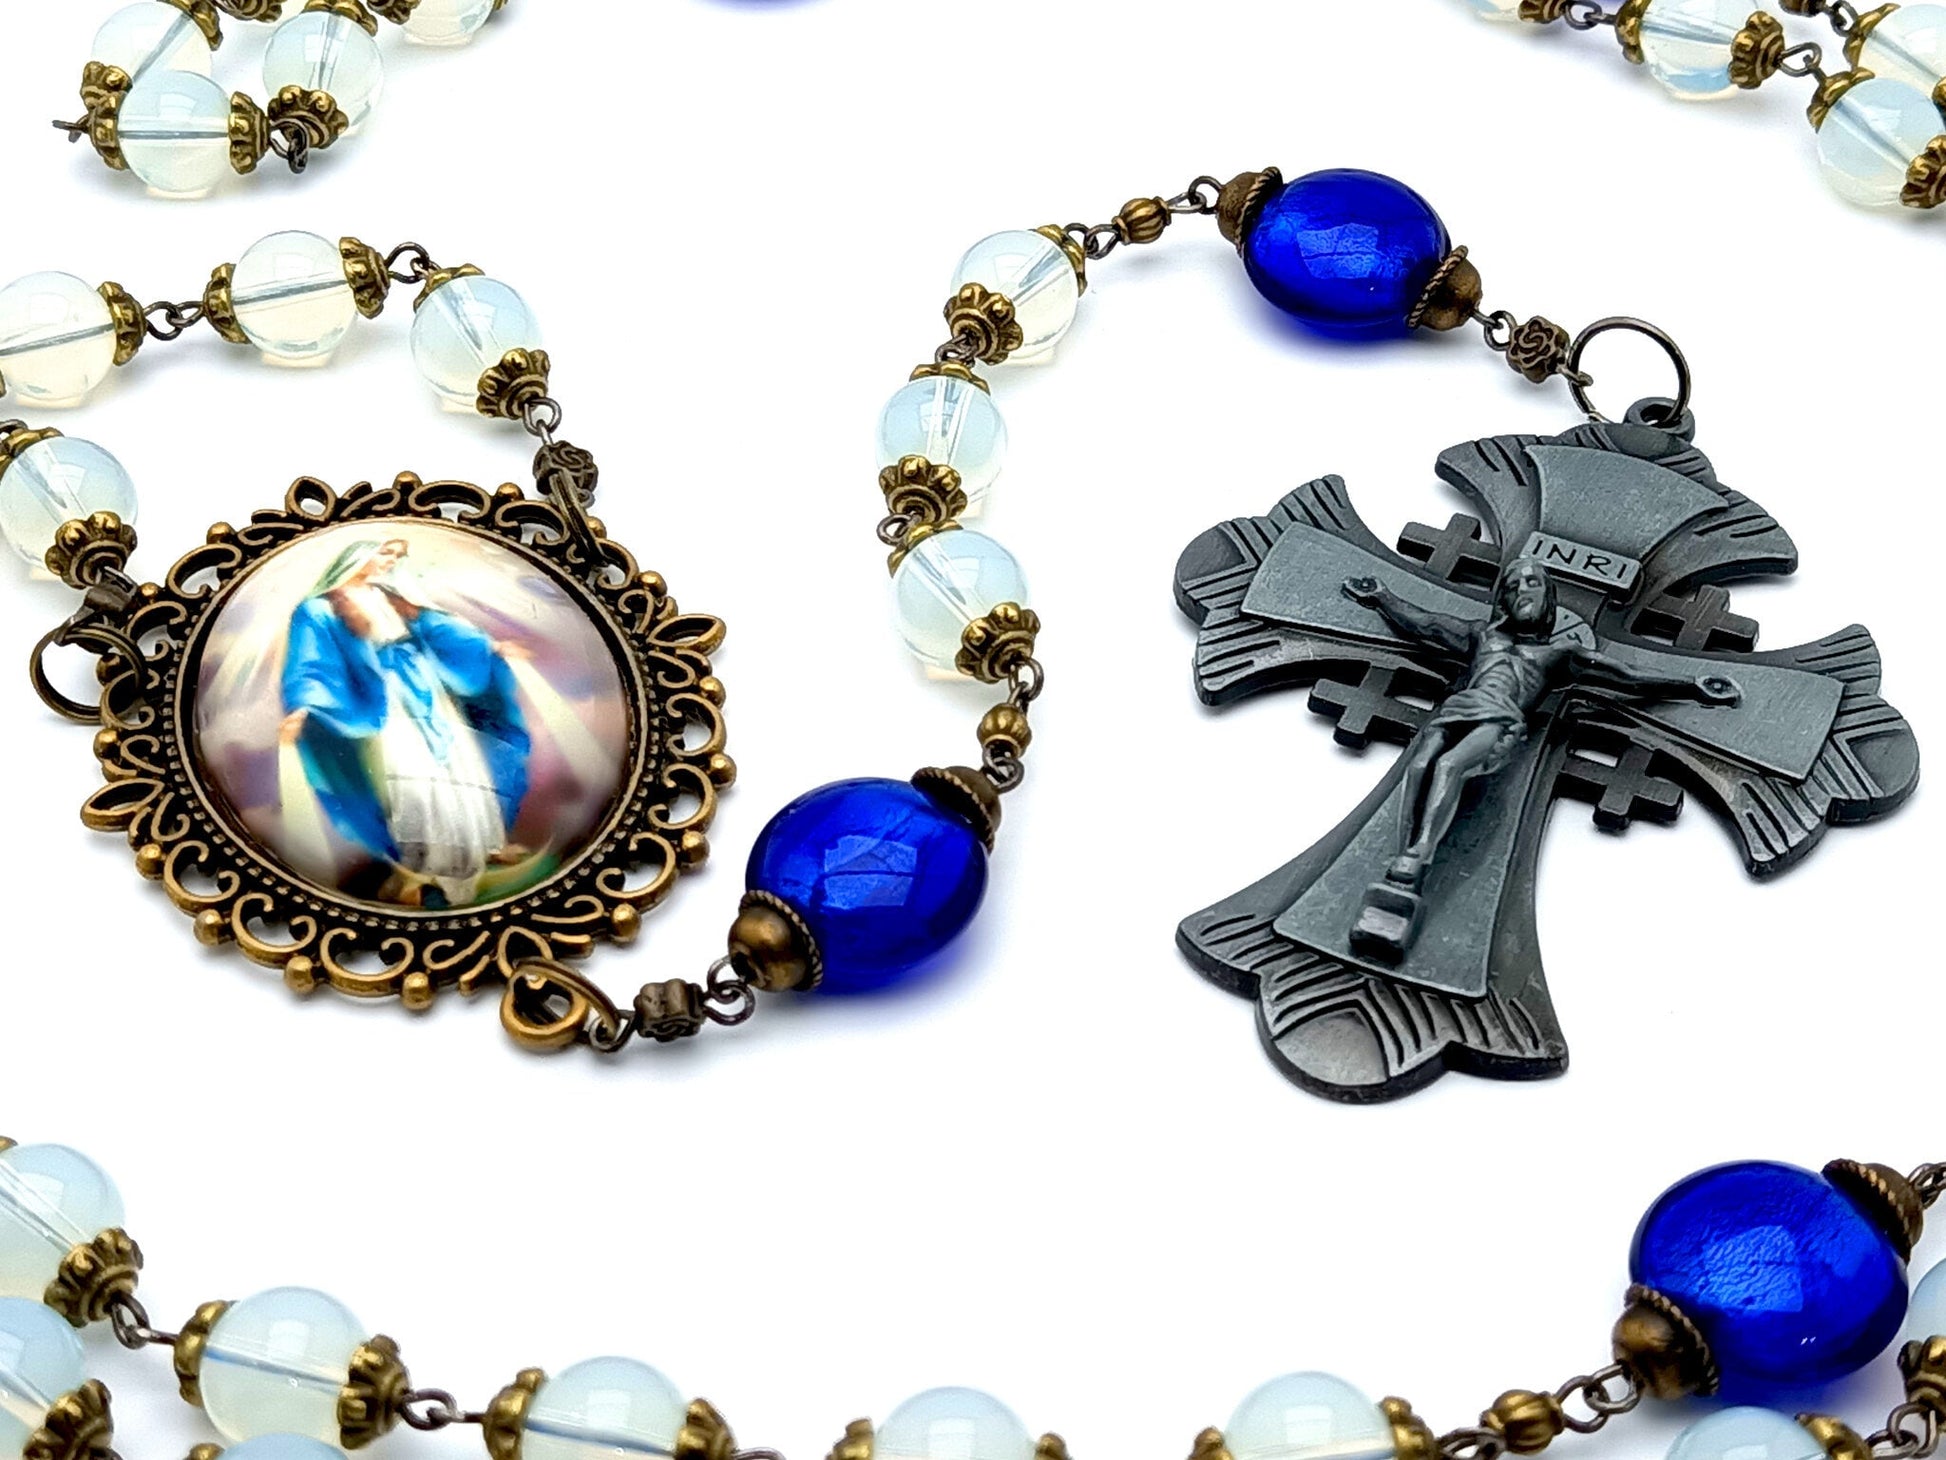 Immaculate Conception unique rosary beads with opal and blue gemstone beads, large pewter crucifix and bronze picture centre medal.